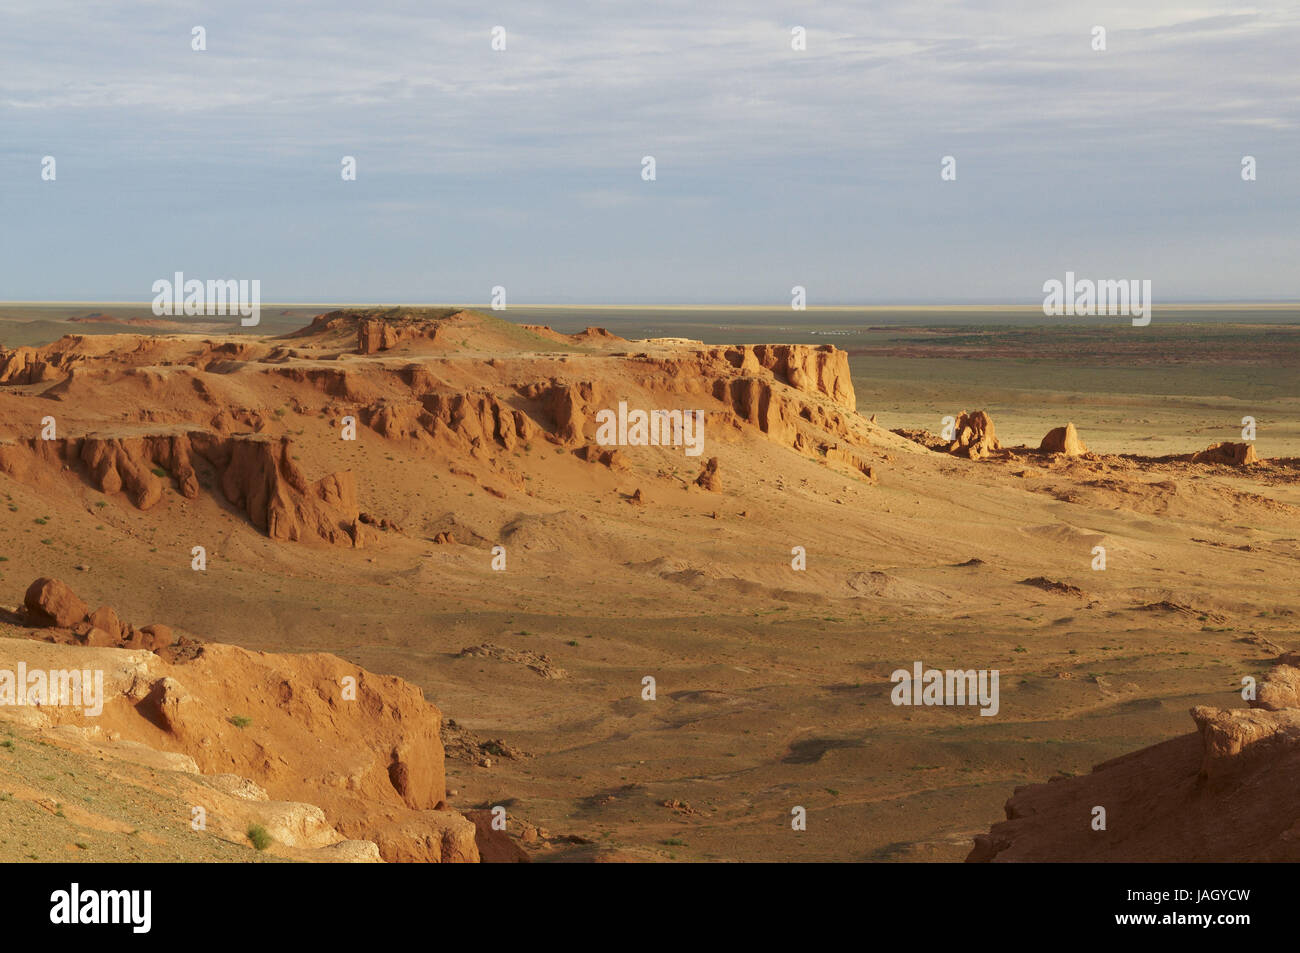 Mongolia,Central Asia,southern Gobi province,Bajanzag,'Flaming Cliffs',cleft bile formation, Stock Photo